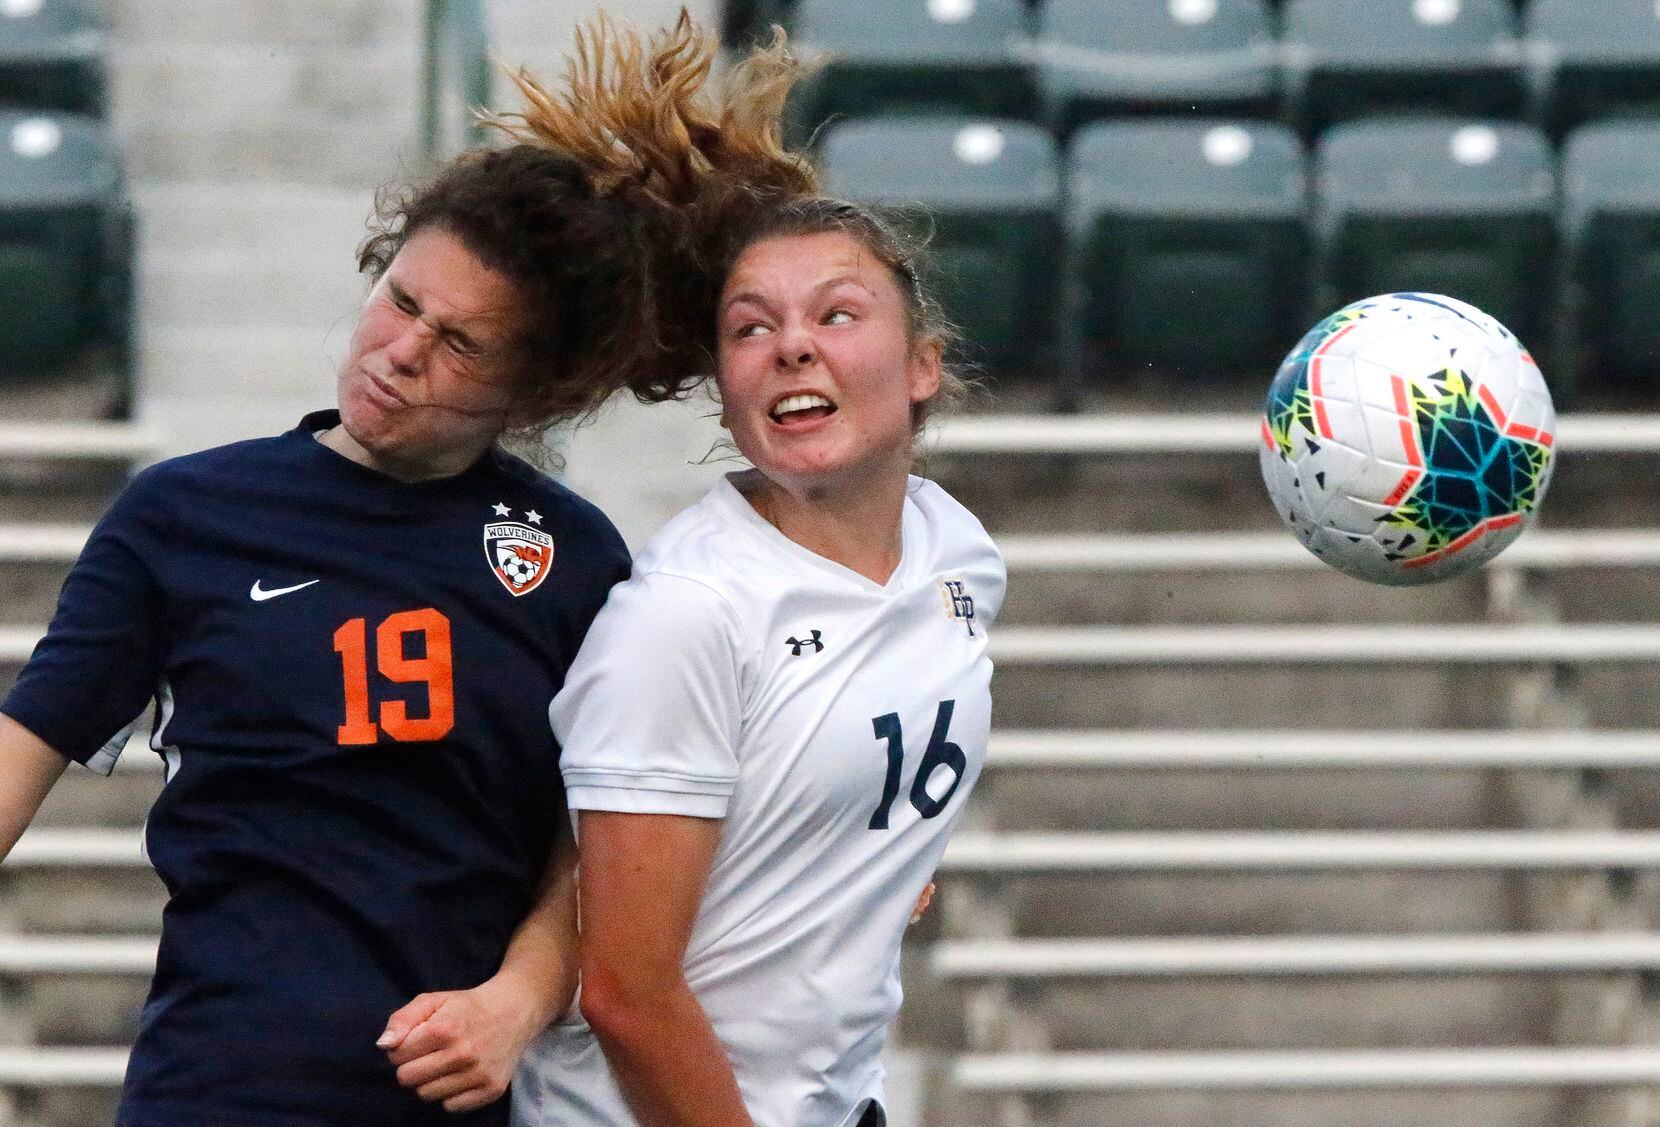 Wakeland midfielder Faith Bell (19) goes up for a header with Highland Park midfielder Quinn Cornog (16) during the first half as Wakeland High School played Highland Park High School in the Class 5A Region II semifinal girls soccer match at Memorial Stadium in Mesquite on Friday, April 9, 2021.